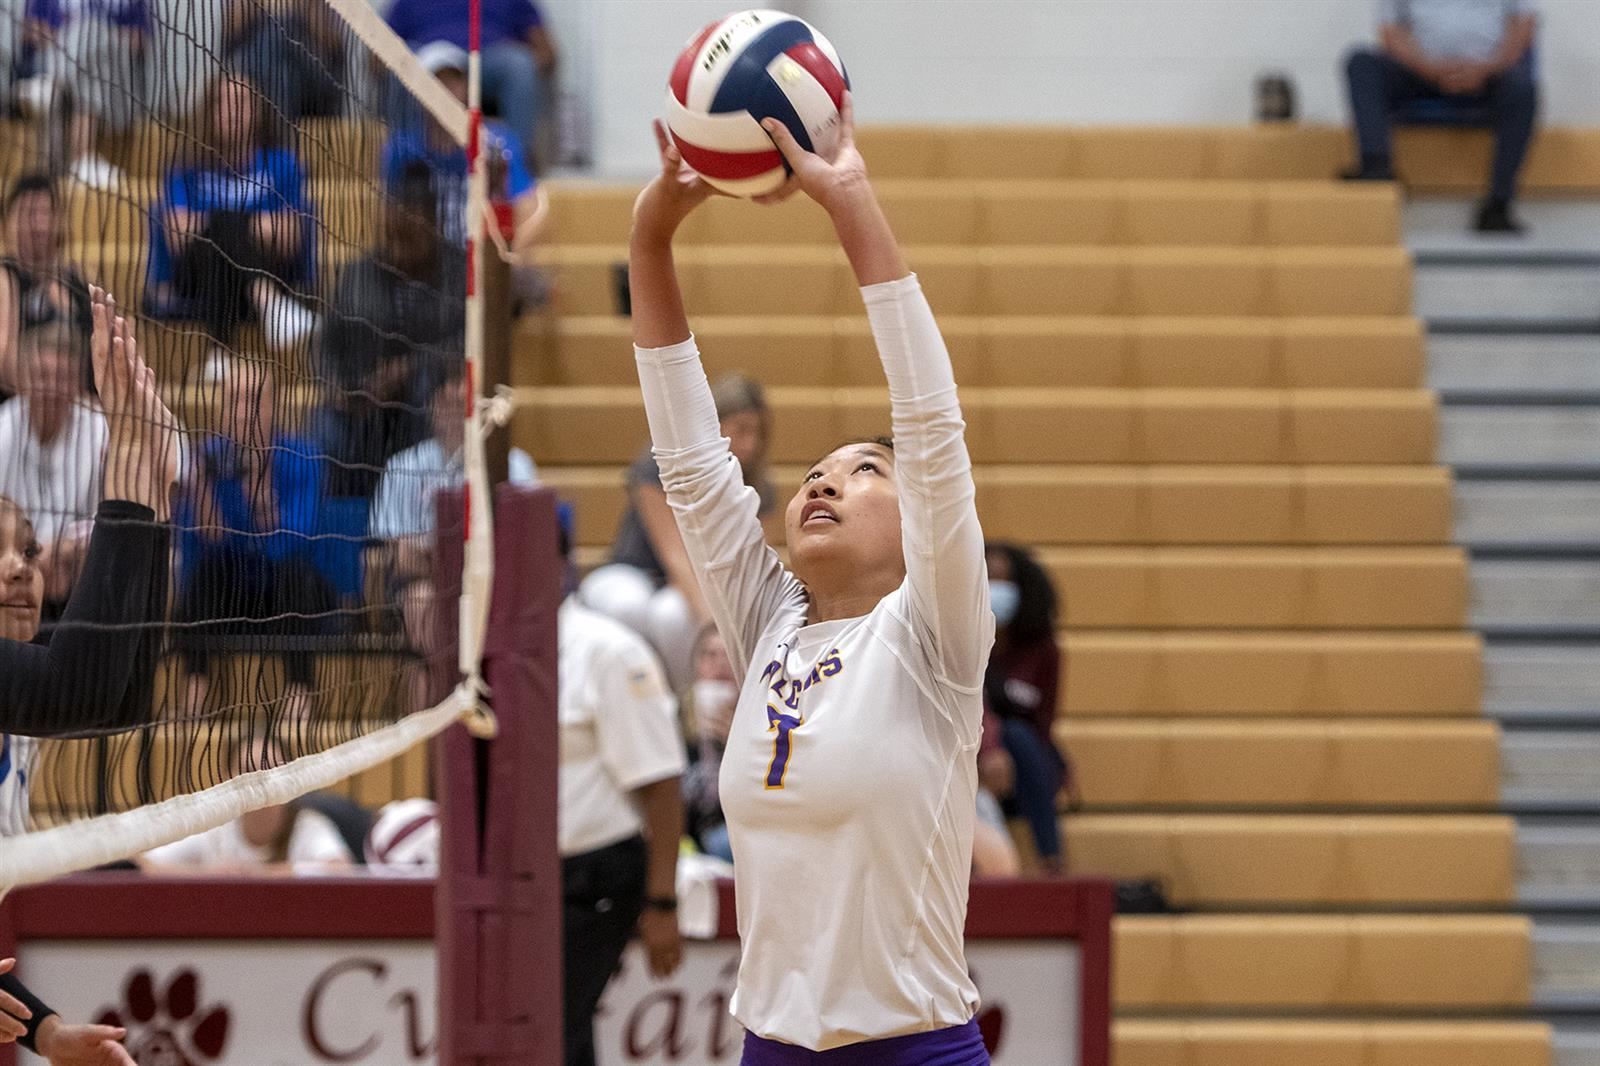 Jersey Village volleyball player Grace Lee was named to the Texas High School Coaches Association Academic All-State team.